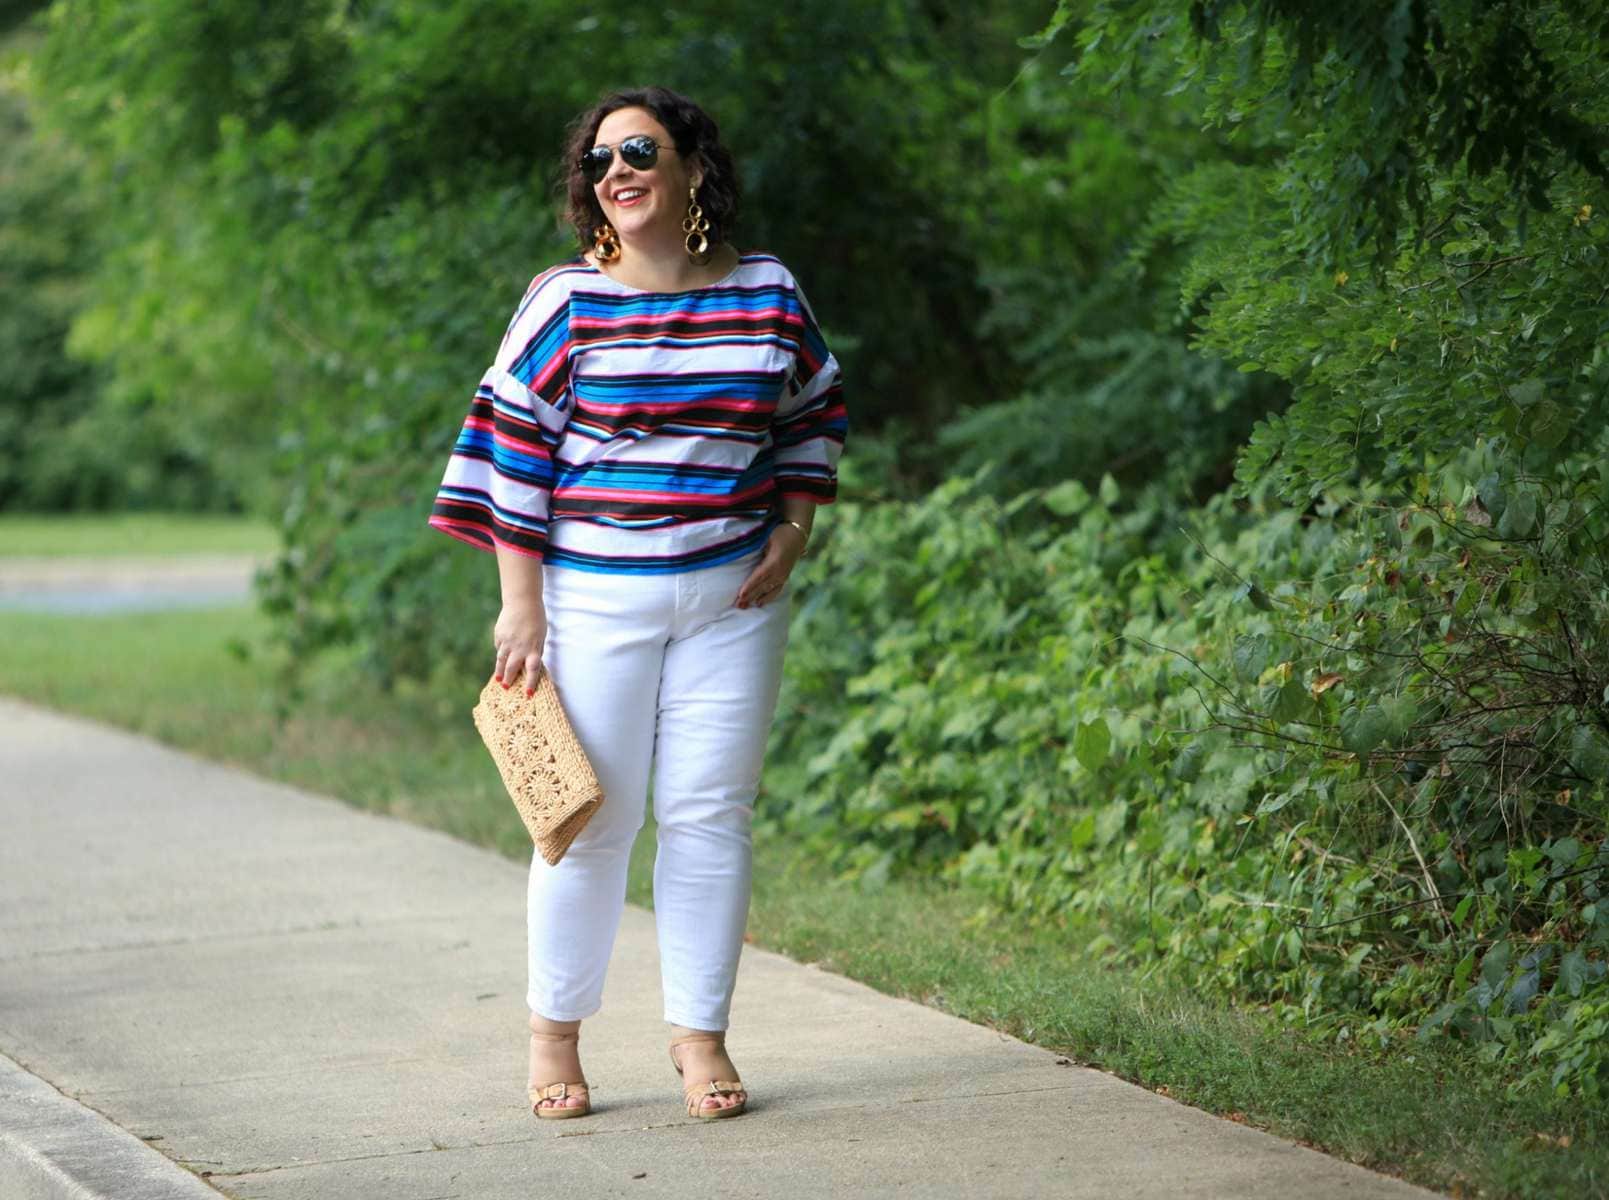 Wardrobe Oxygen in a candy striped cotton bell sleeve blouse from Vince Camuto with white Talbots ankle jeans, Aerosoles sandals, and a raffia clutch